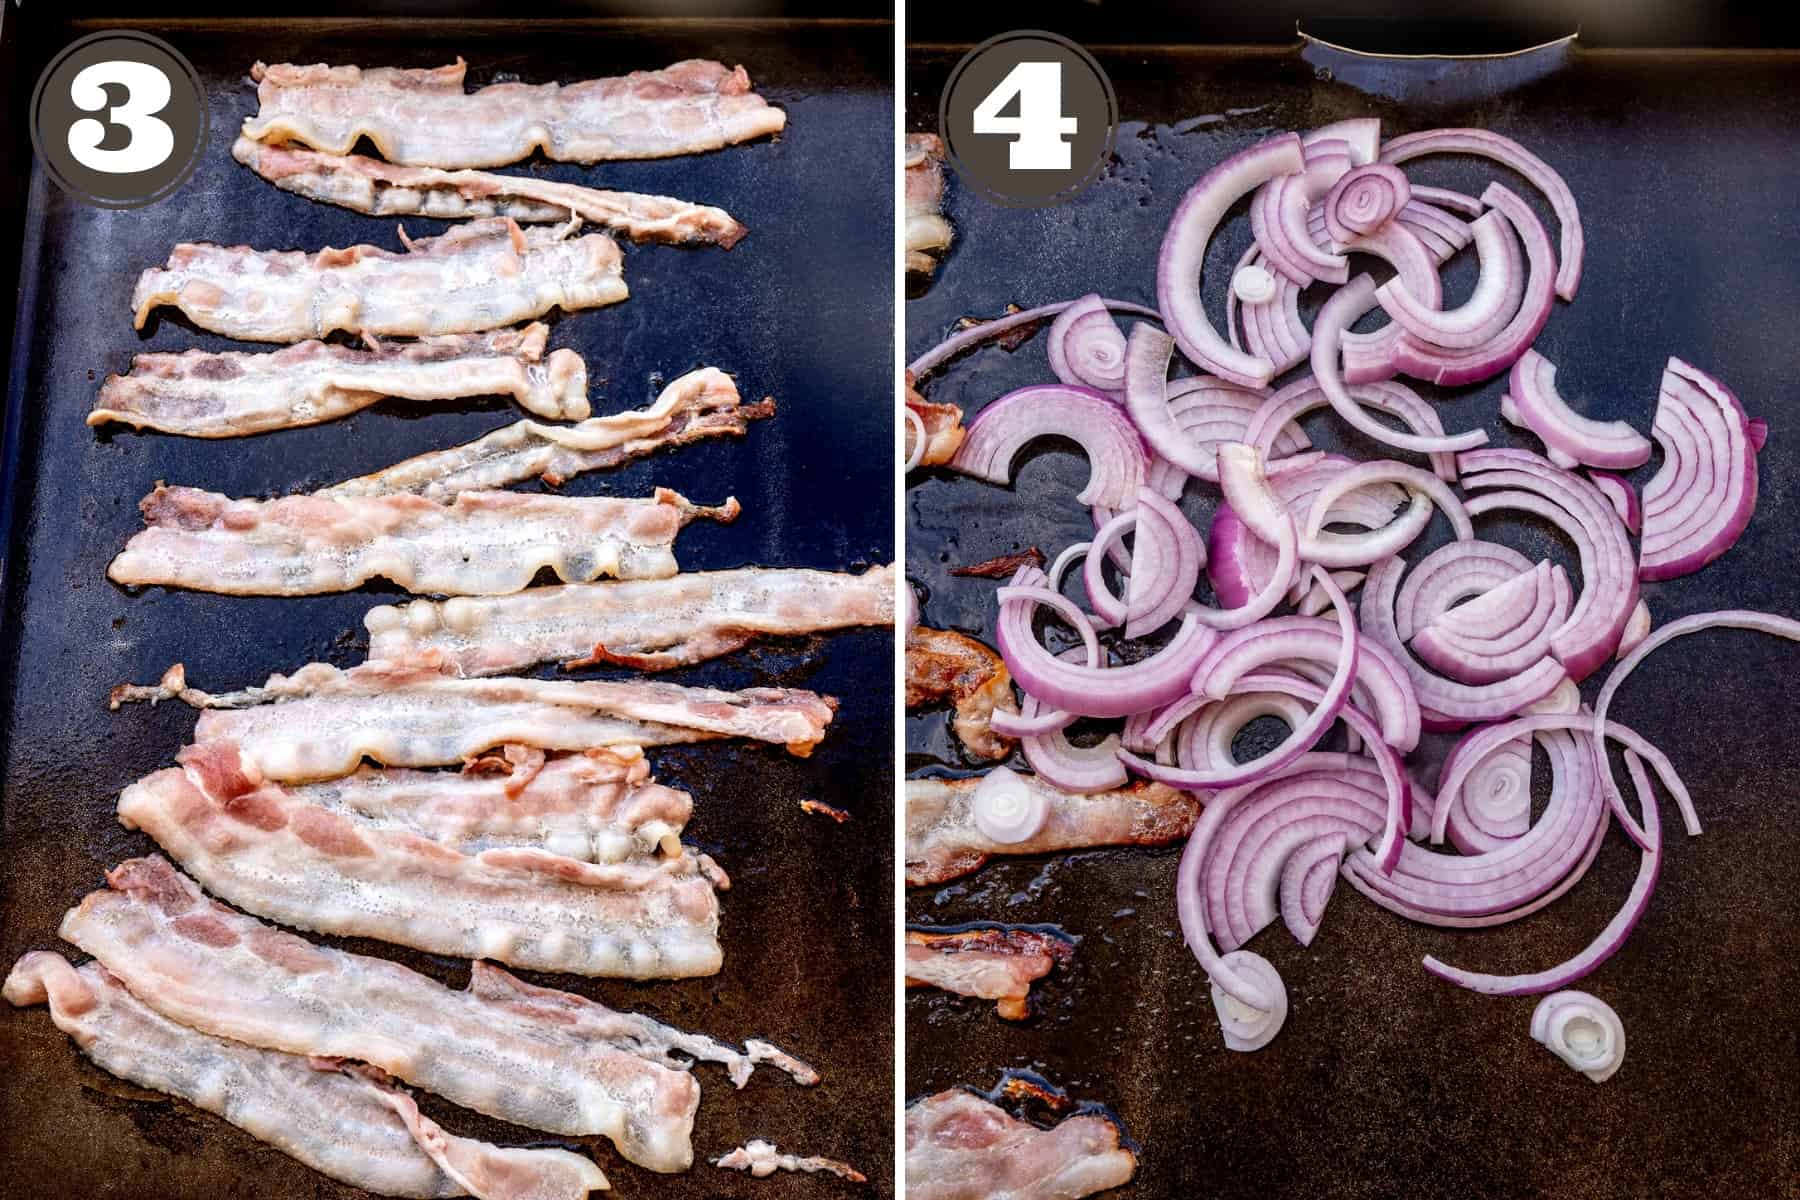 Side by side photos showing bacon cooking on a blackstone and onions caramelizing.